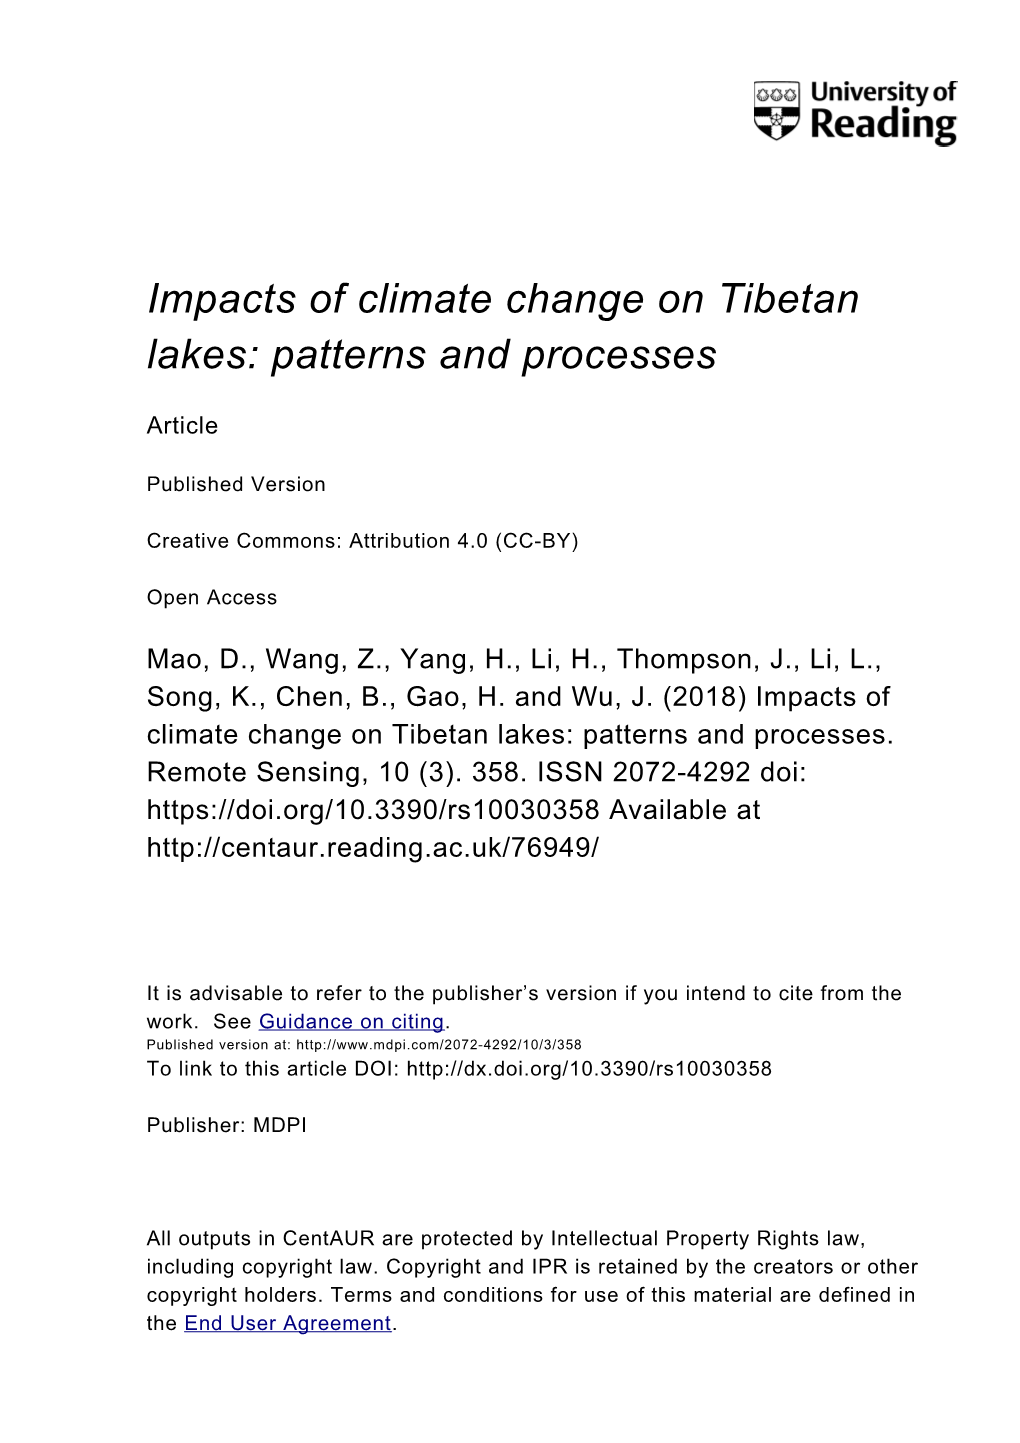 Impacts of Climate Change on Tibetan Lakes: Patterns and Processes